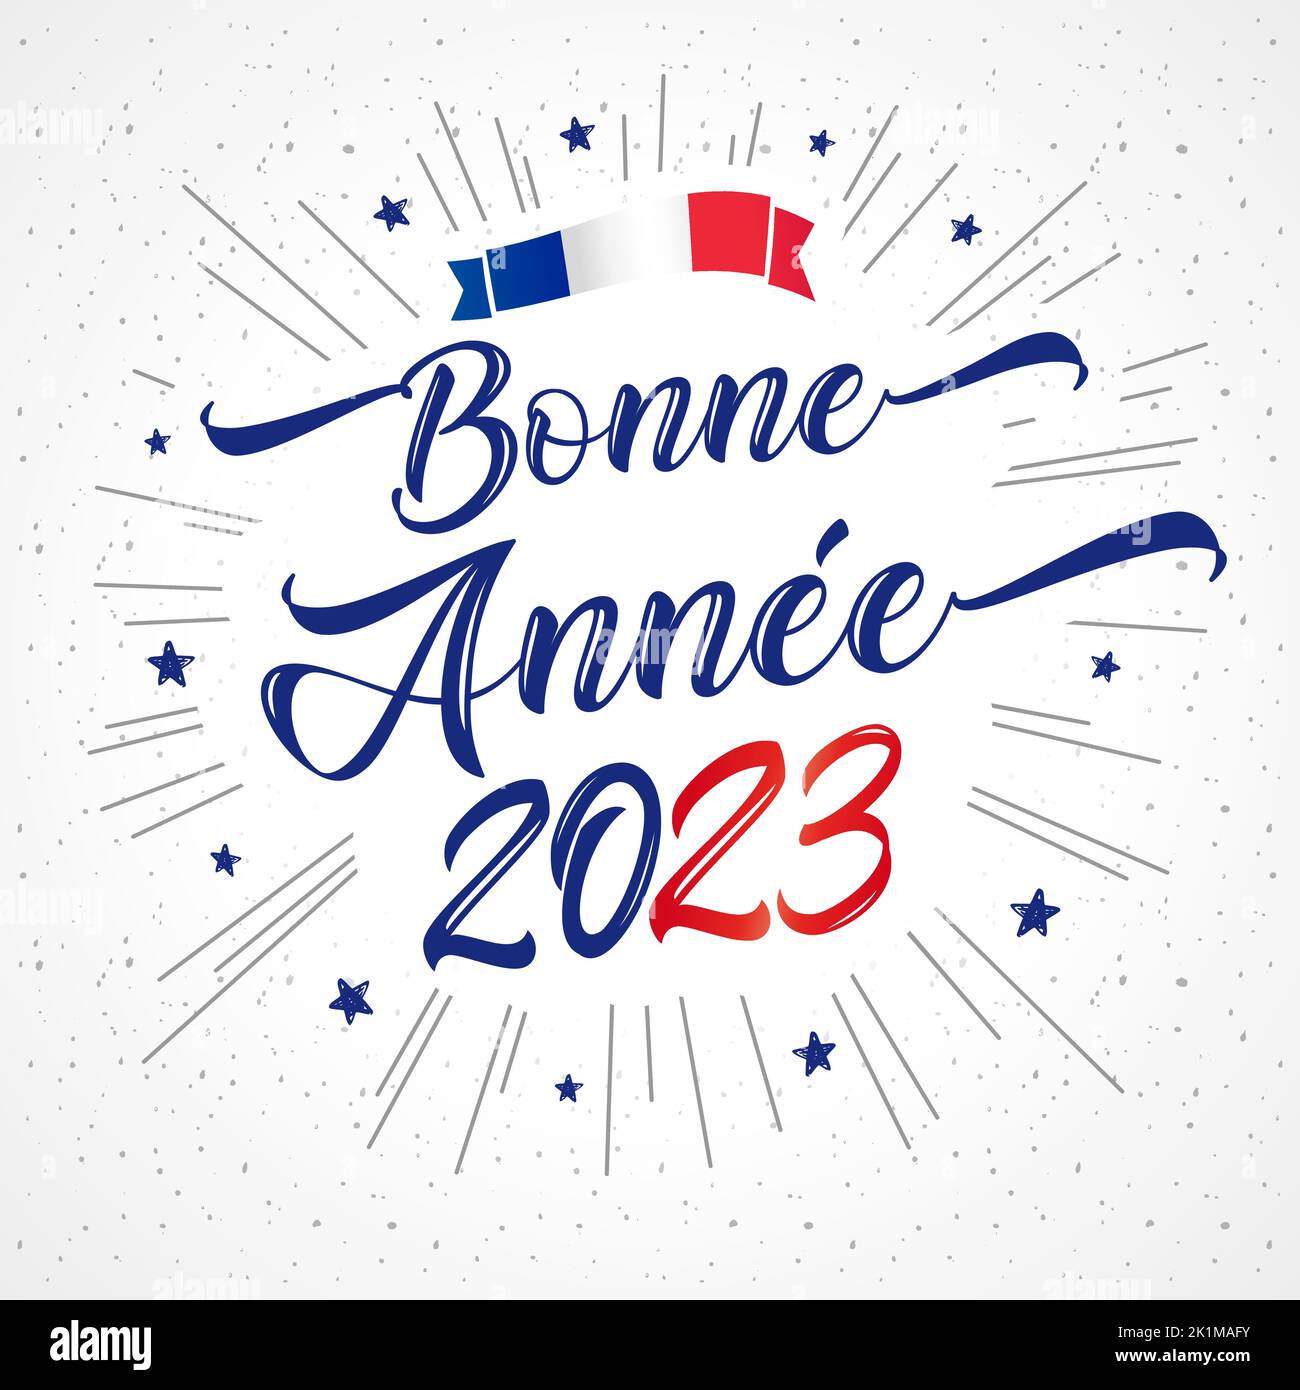 Bonne Annee French text - Happy New Year 2023 lettering holiday card. 20 23 numbers, blue stars and elegant calligraphy. Vector illustration Stock Vector